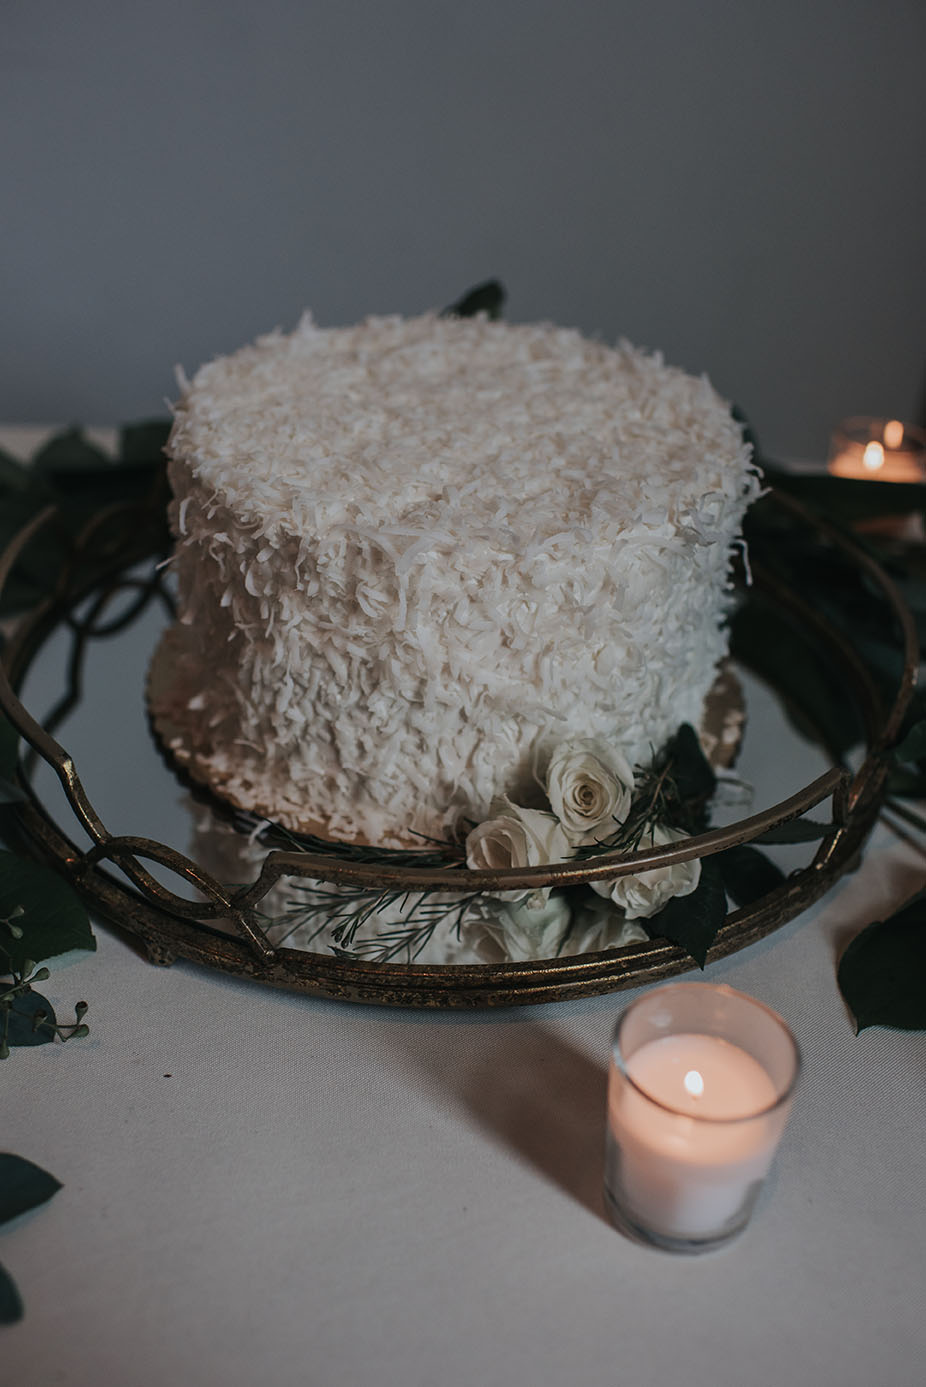 Textured White Coconut Cake with Greenery